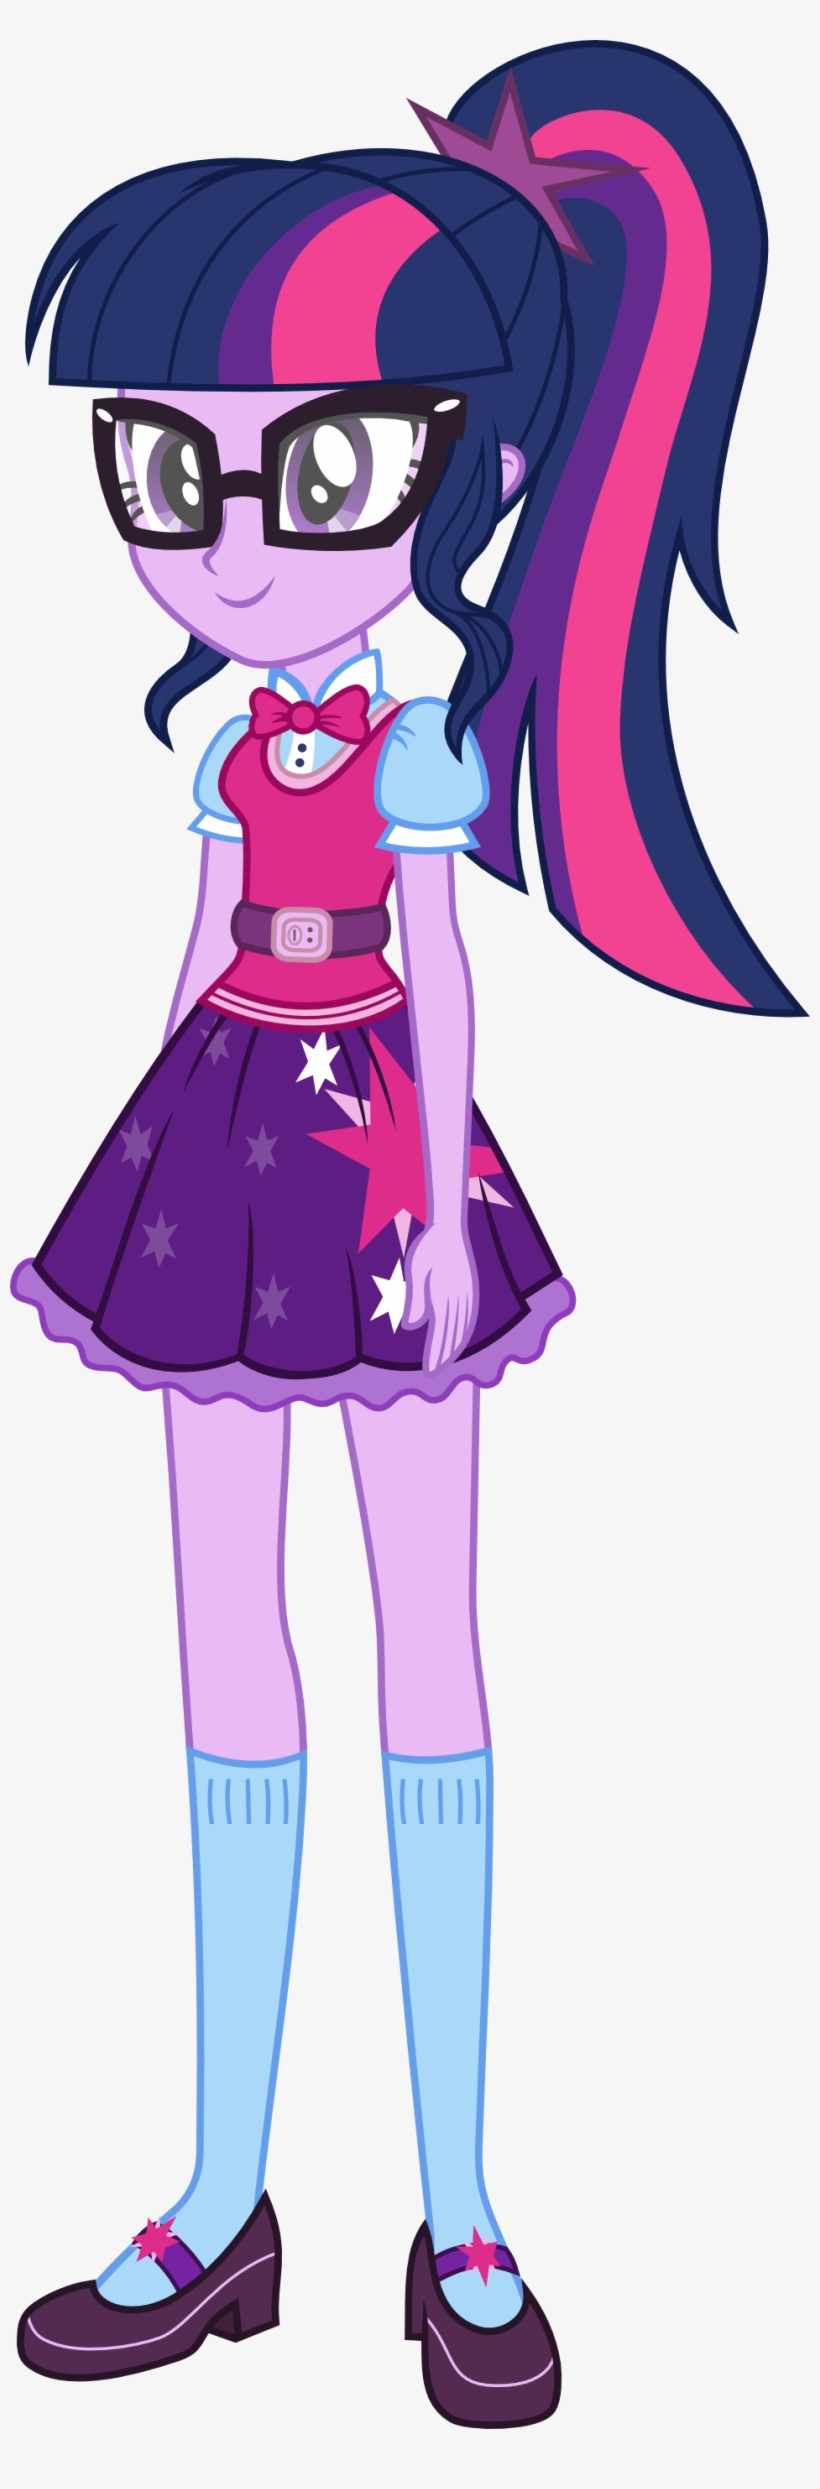 Twilight Sparkle From Equestria Girls - Equestria Girls Twilight's Sparkly Sleepover Surprise, transparent png #1567543